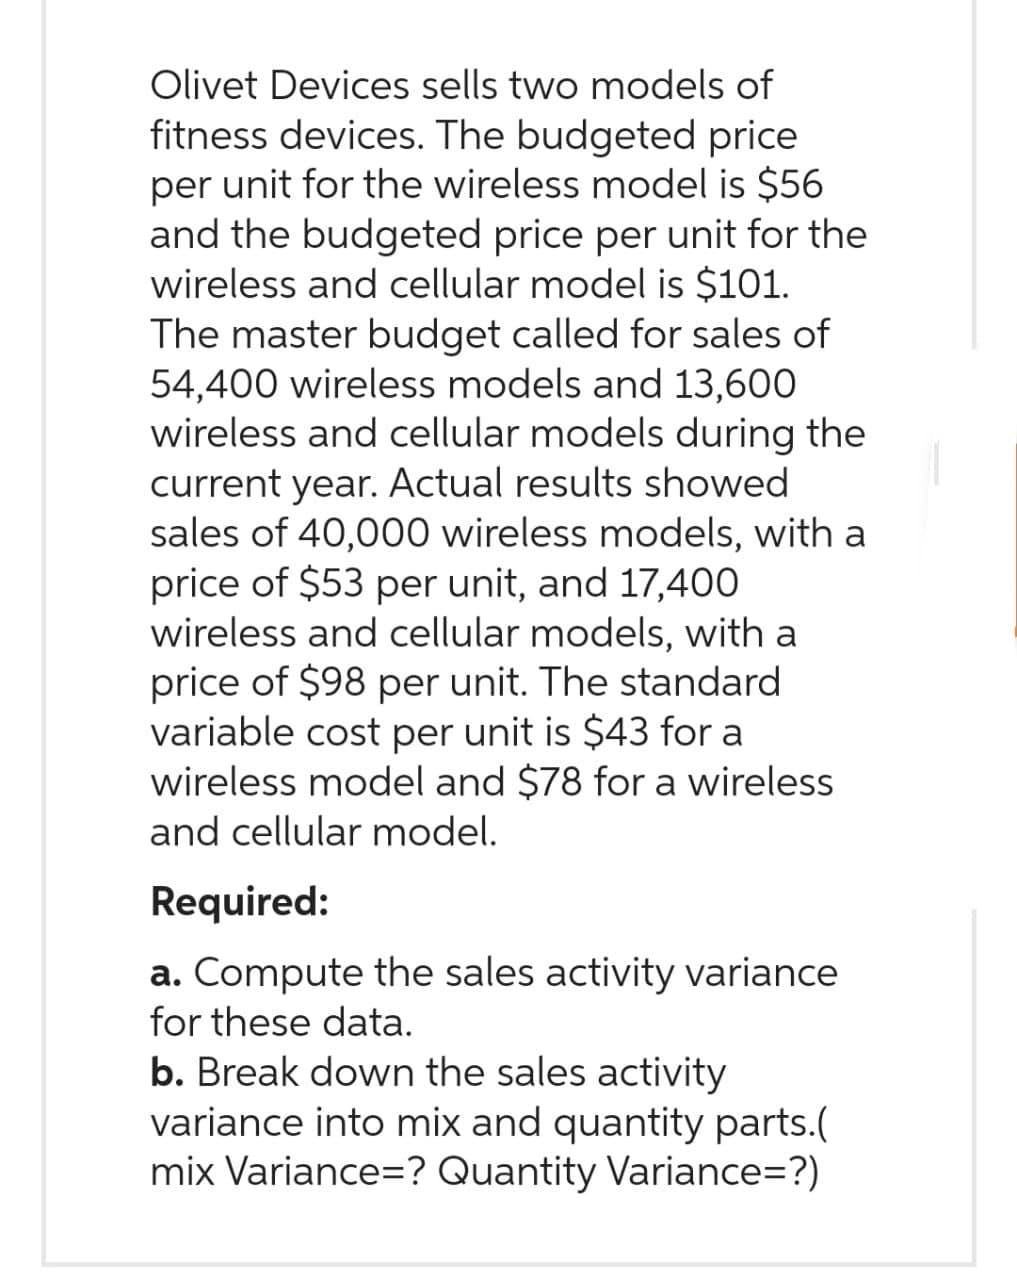 Olivet Devices sells two models of
fitness devices. The budgeted price
per unit for the wireless model is $56
and the budgeted price per unit for the
wireless and cellular model is $101.
The master budget called for sales of
54,400 wireless models and 13,600
wireless and cellular models during the
current year. Actual results showed
sales of 40,000 wireless models, with a
price of $53 per unit, and 17,400
wireless and cellular models, with a
price of $98 per unit. The standard
variable cost per unit is $43 for a
wireless model and $78 for a wireless
and cellular model.
Required:
a. Compute the sales activity variance
for these data.
b. Break down the sales activity
variance into mix and quantity parts.(
mix Variance=? Quantity Variance=?)